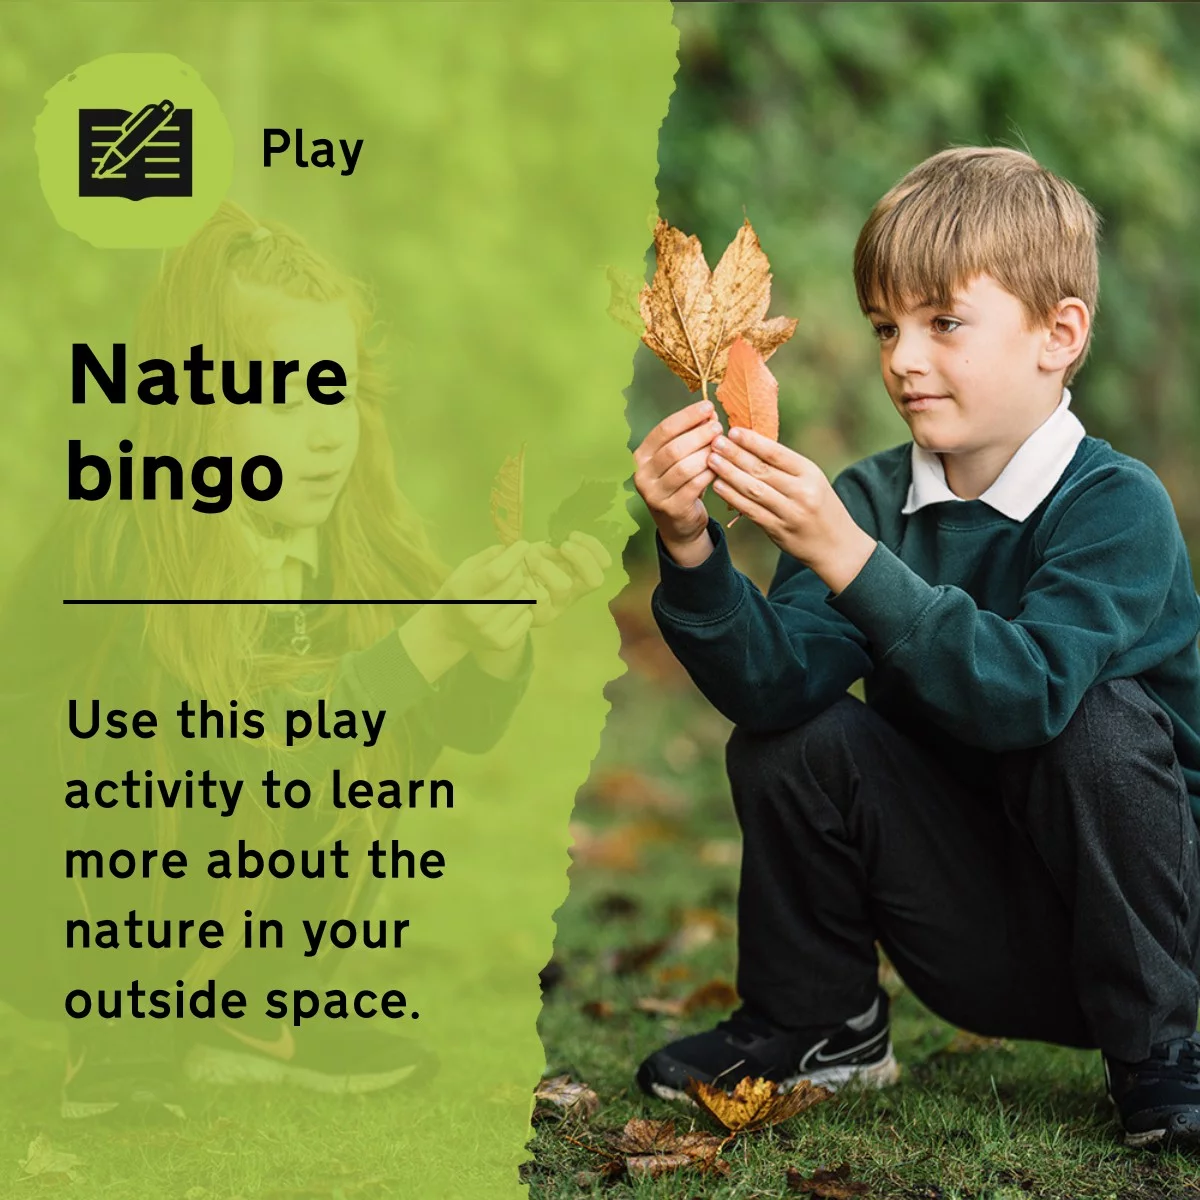 Use this play activity to explore and learn more about your outside space. This outdoor lesson idea will improve vocabulary and knowledge of the species in your local area, while playing a fun game of bingo.